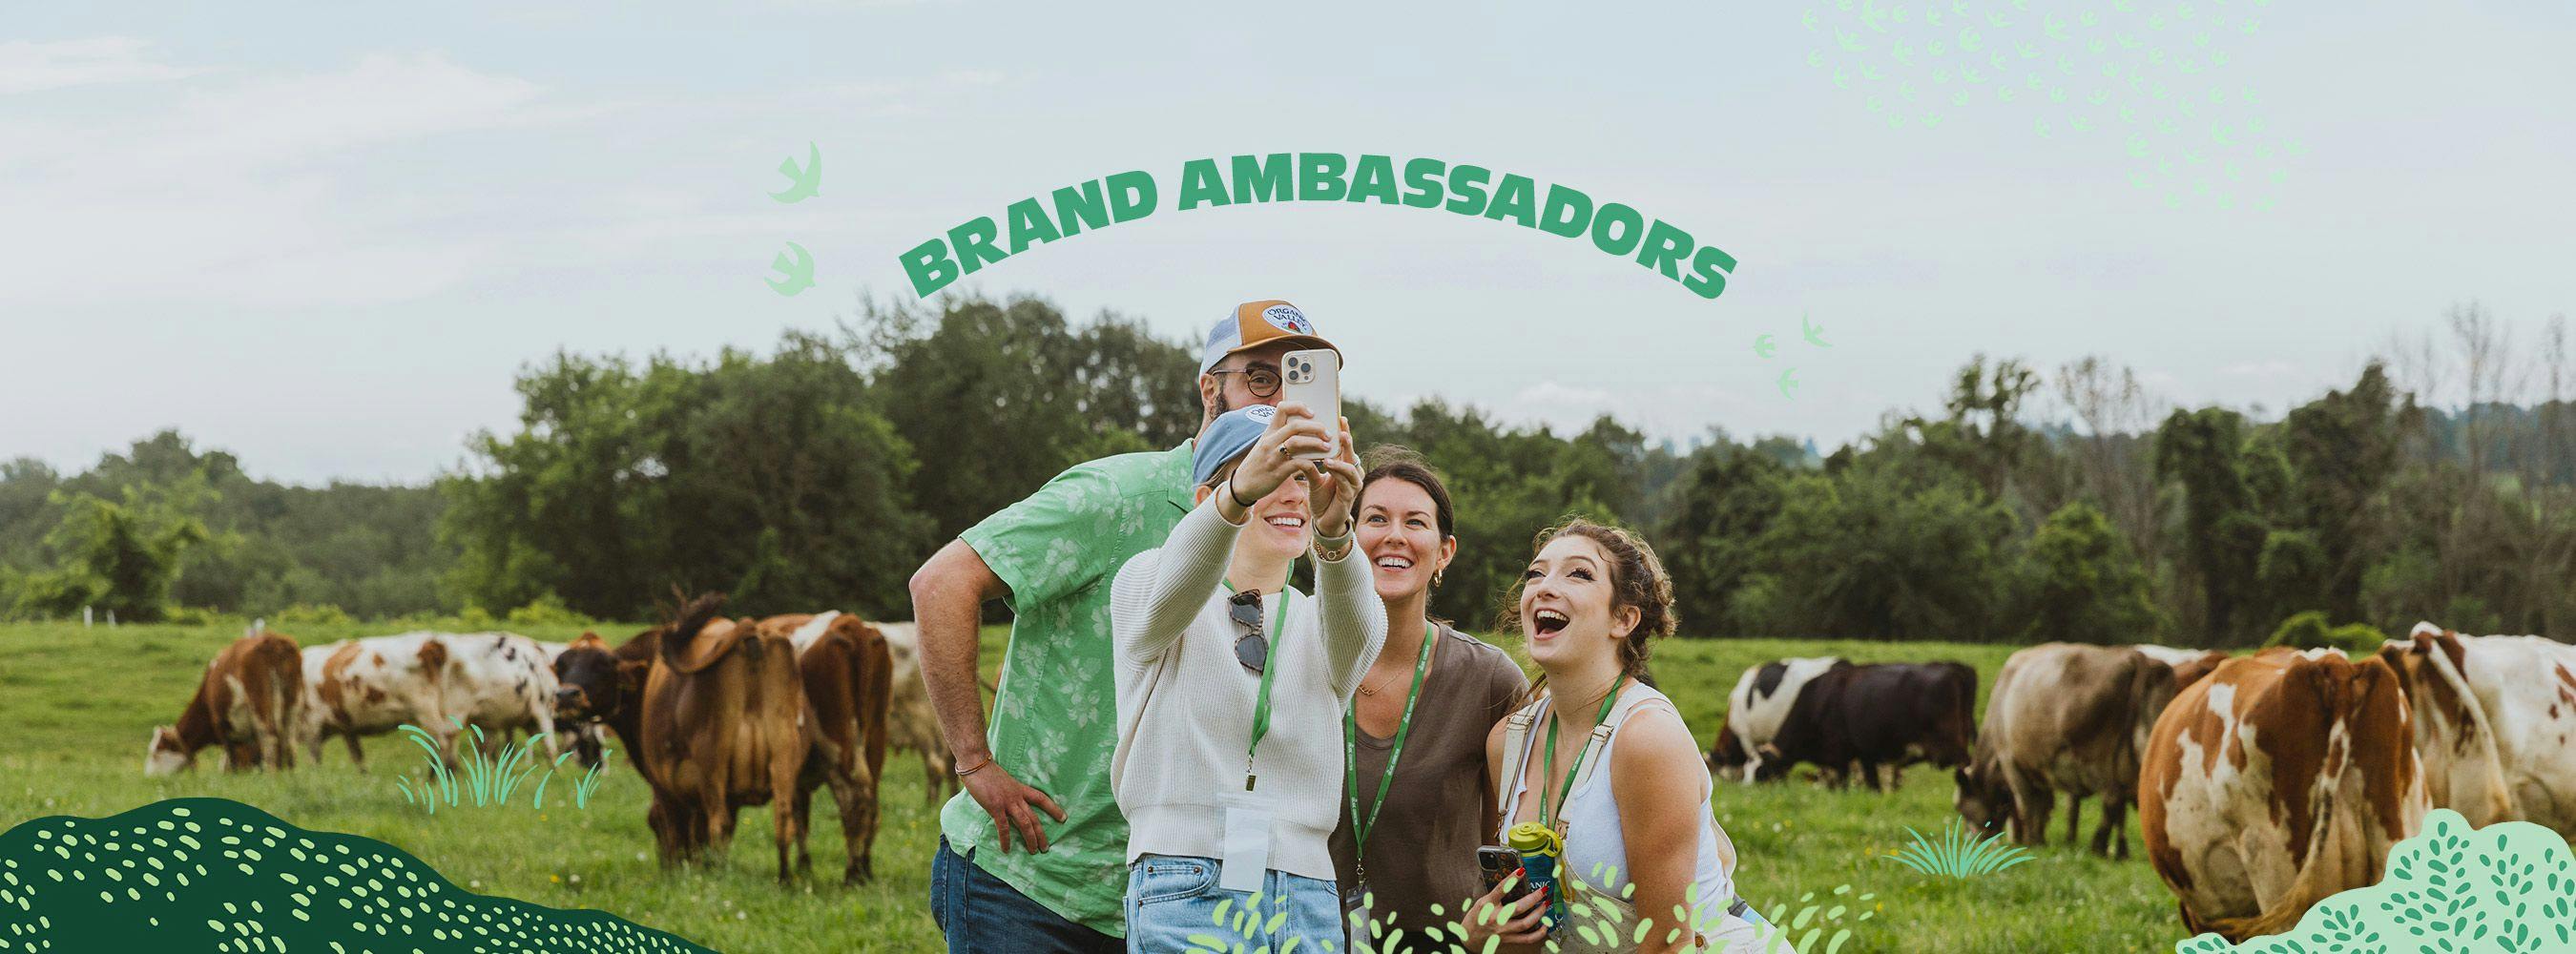 People from Organic Valley's Ambassador Program with cows in the background.